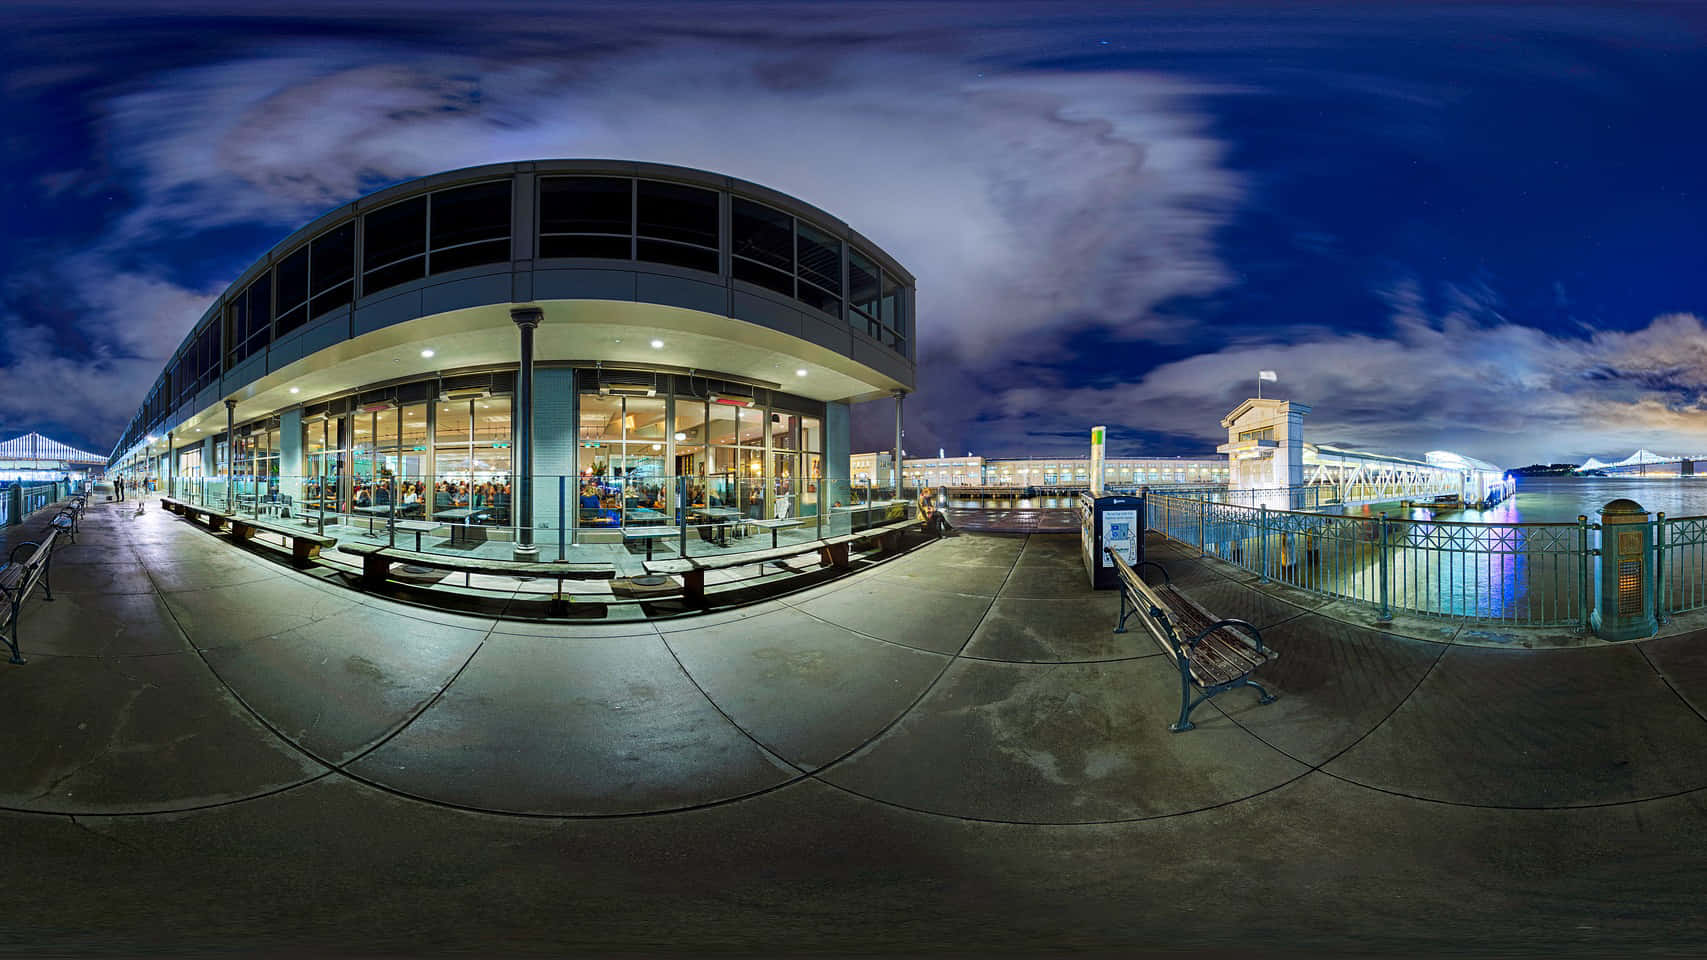 Night Seaside 360 Degree Picture